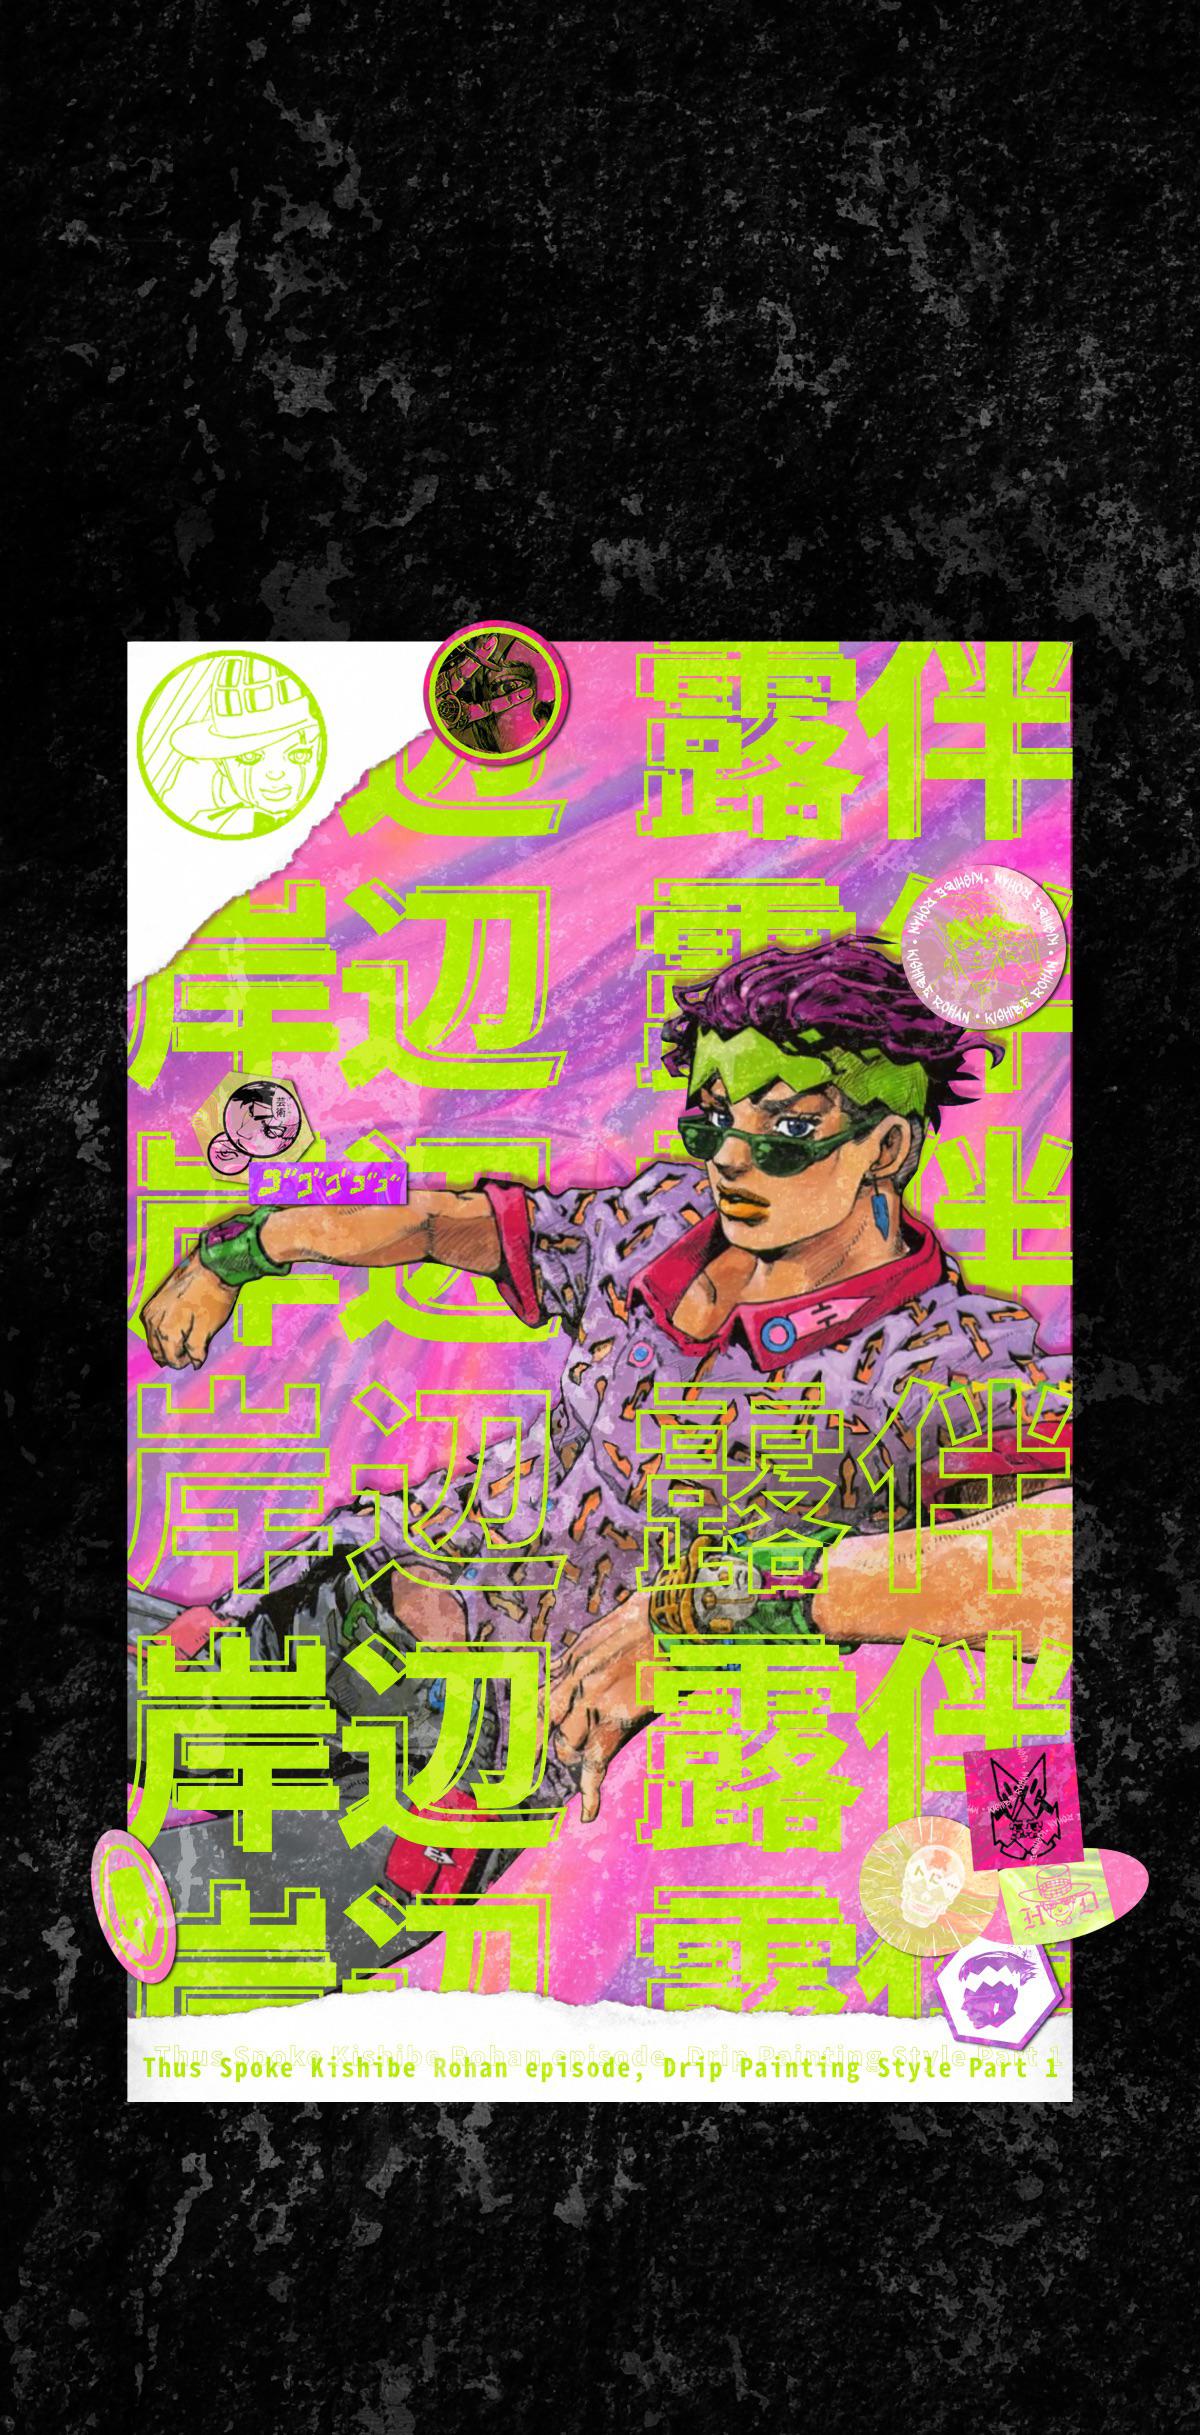 Another Rohan Wallpaper, TSKR Drip Painting Style Pt. 1